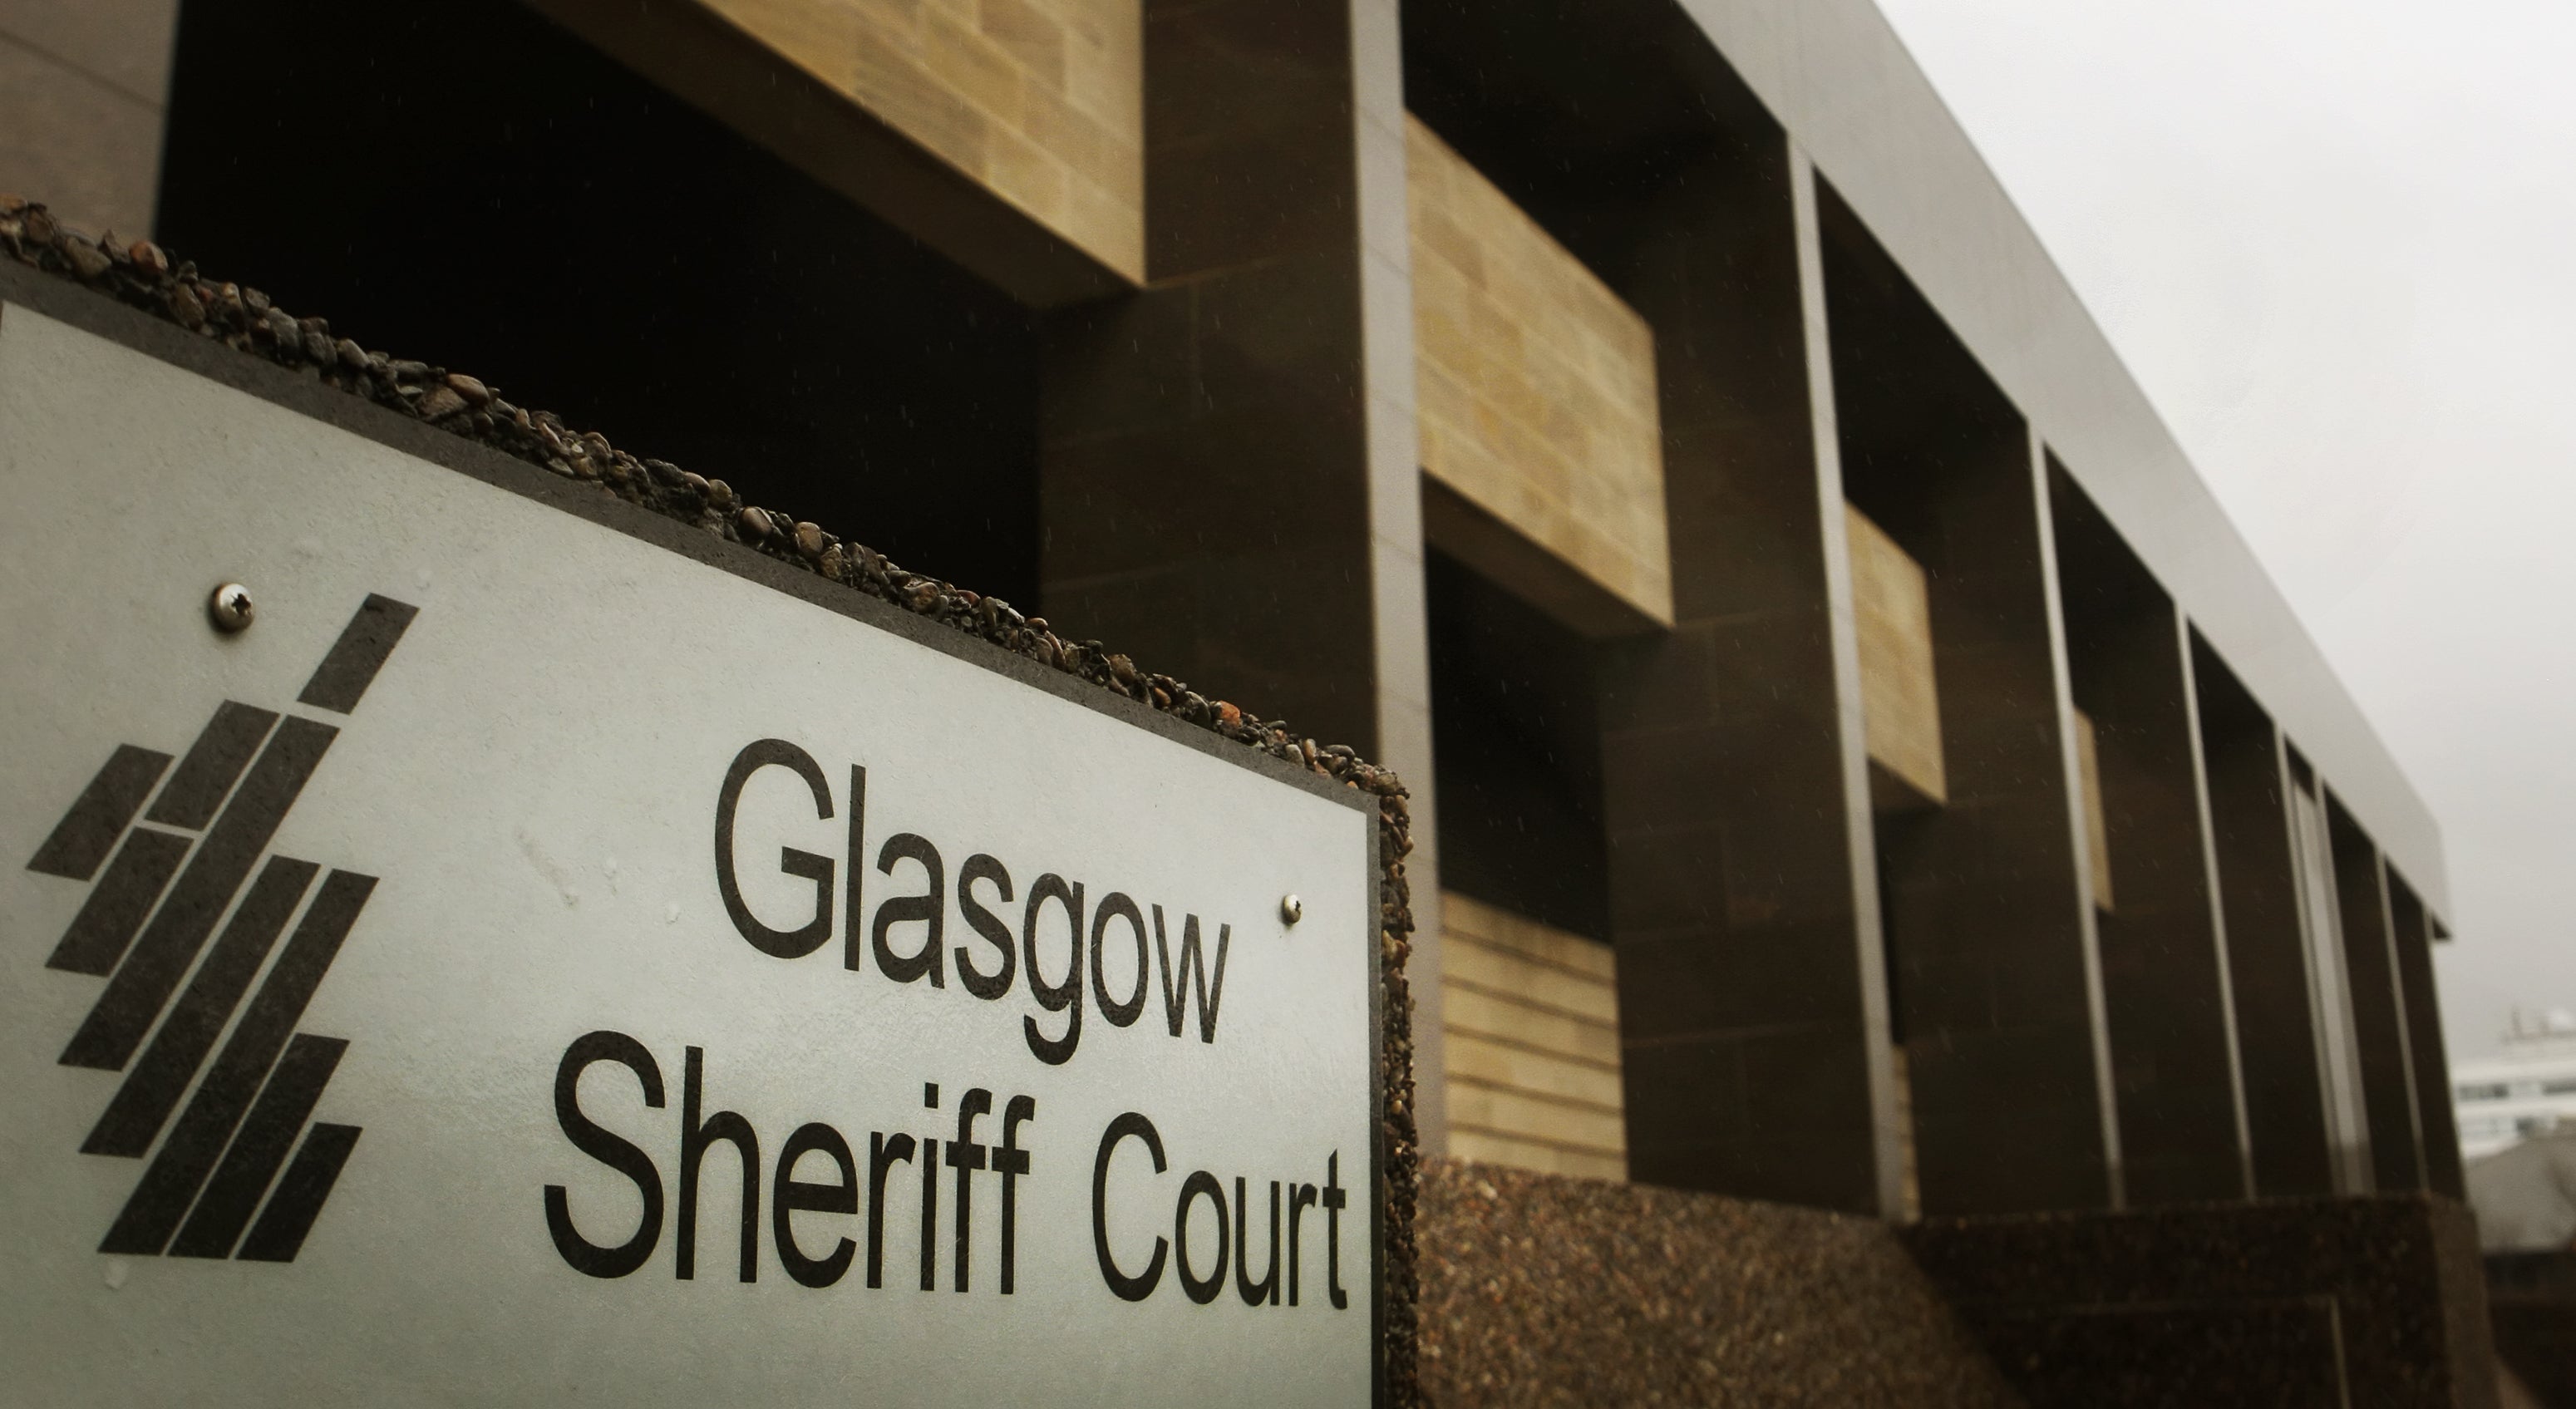 Natalie McGarry is on trial at Glasgow Sheriff Court (PA)